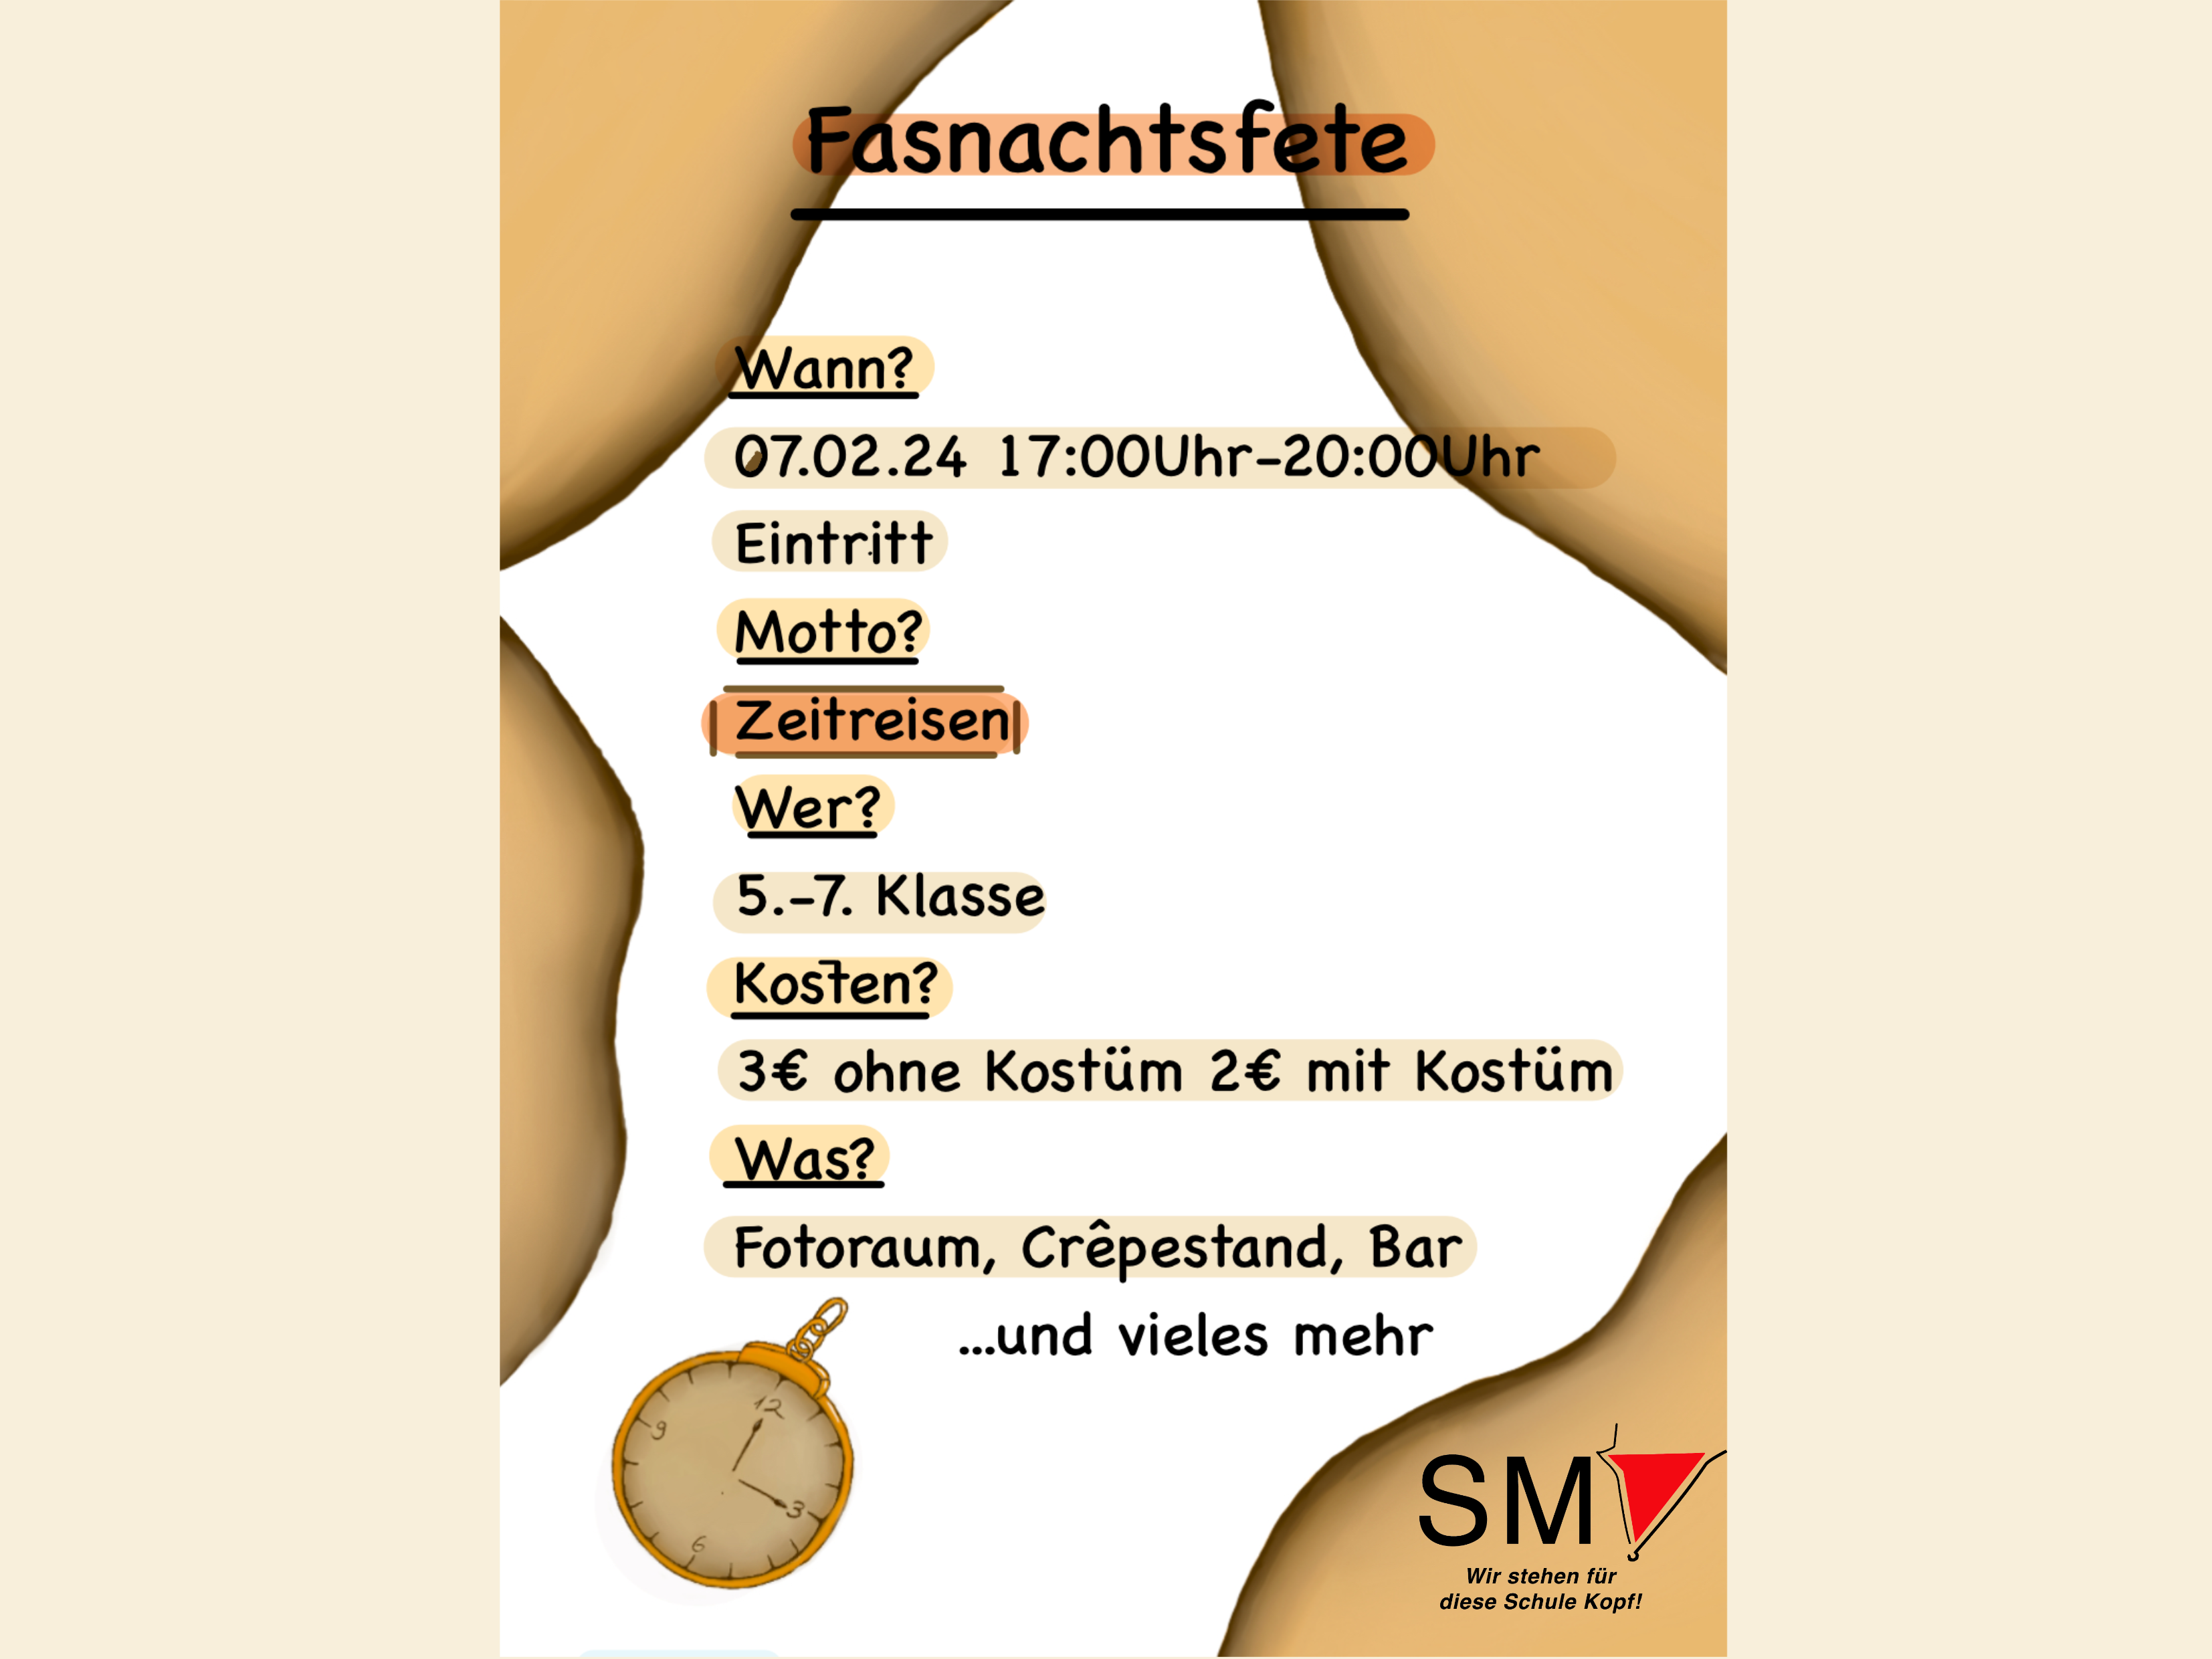 Fasnachtsfete 